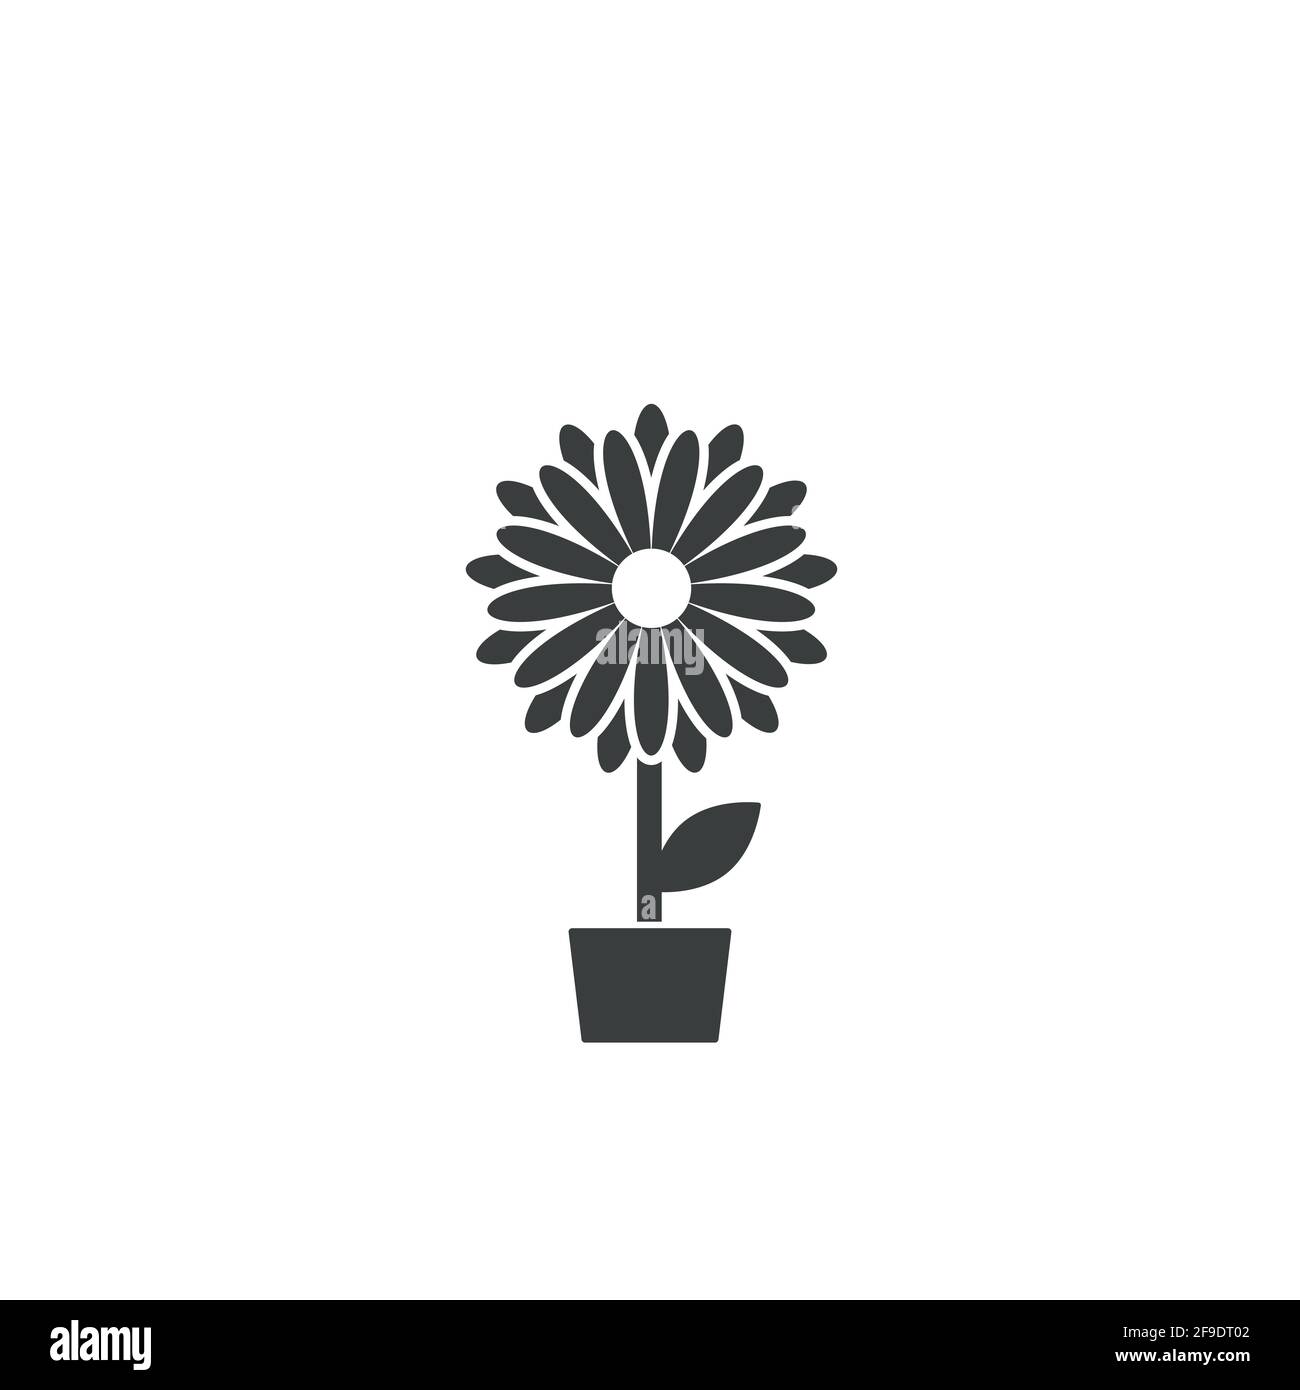 Black flat icon of chrysanthemum flower in pot. Big Bloom with big sharp petals and white core. Isolated on white. Vector illustration. Eco style. Nat Stock Vector